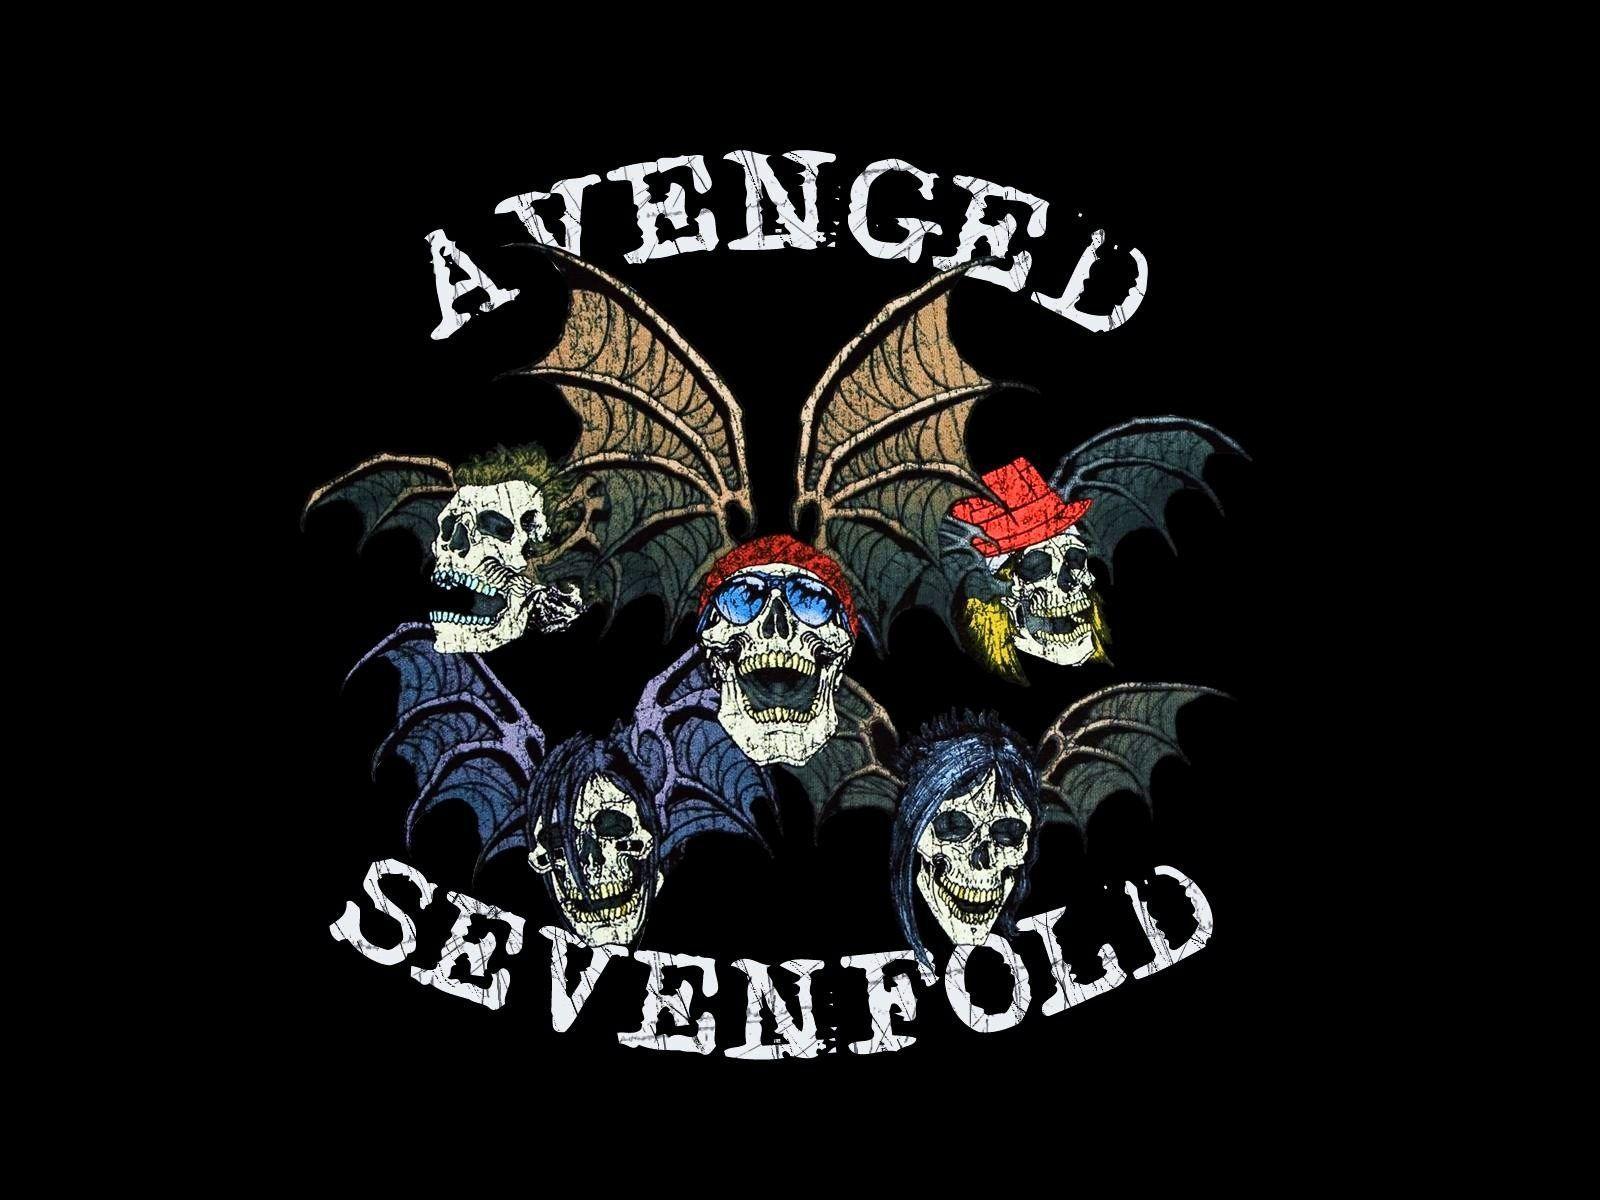 Avenged Sevenfold HD Wallpapers for Desktop and Android